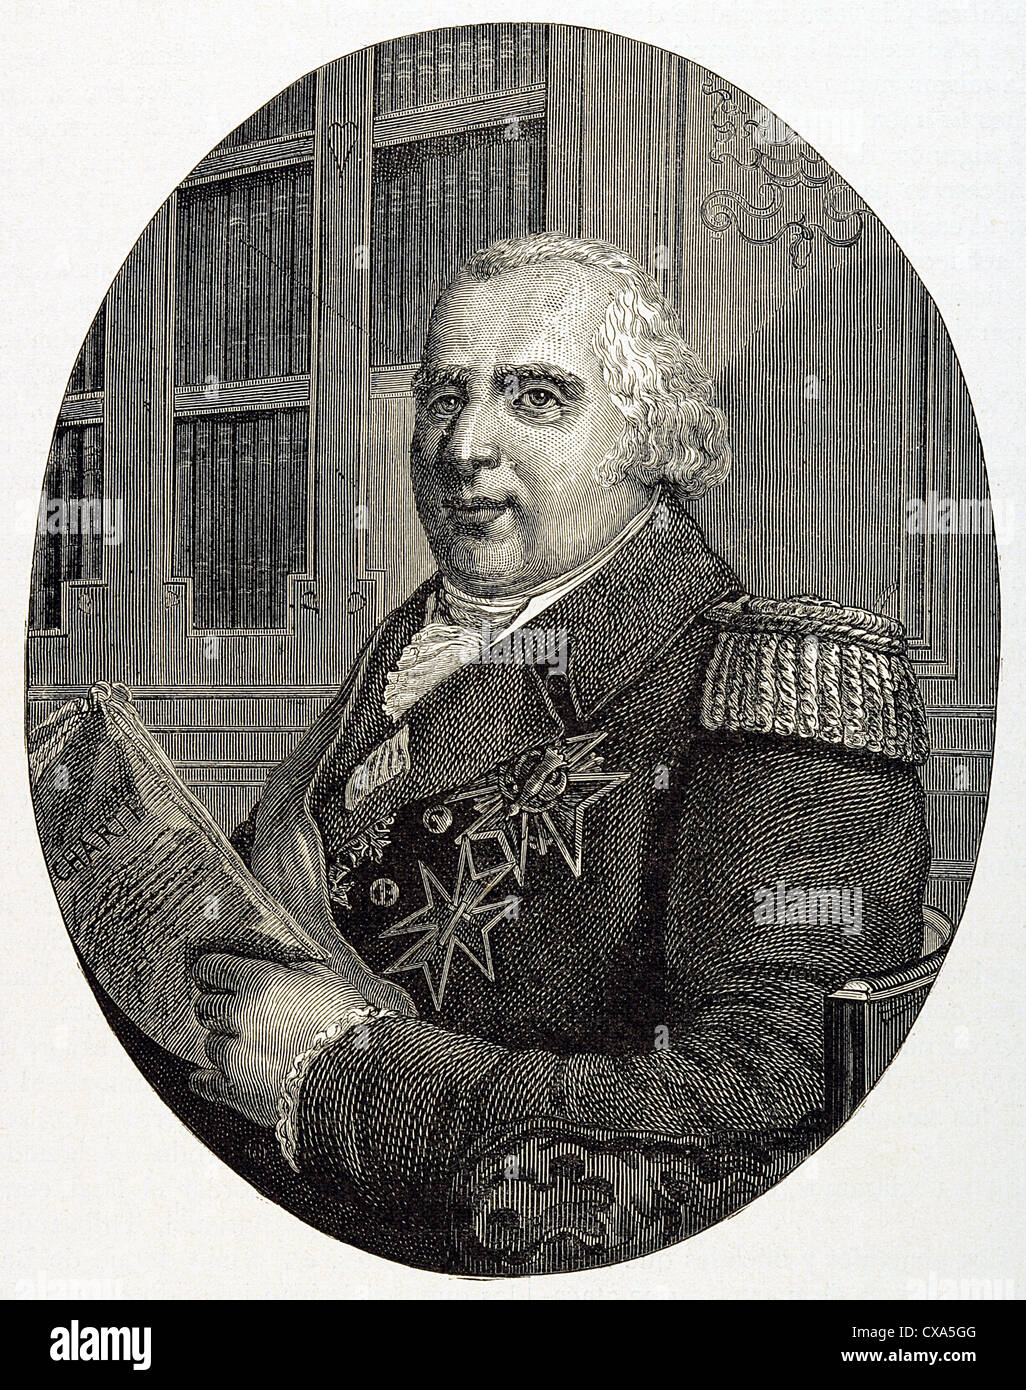 Louis XVIII (1755-1824). King of France from 1814-15 and 1815-24. Brother of Louis XVI. Engraving. Stock Photo